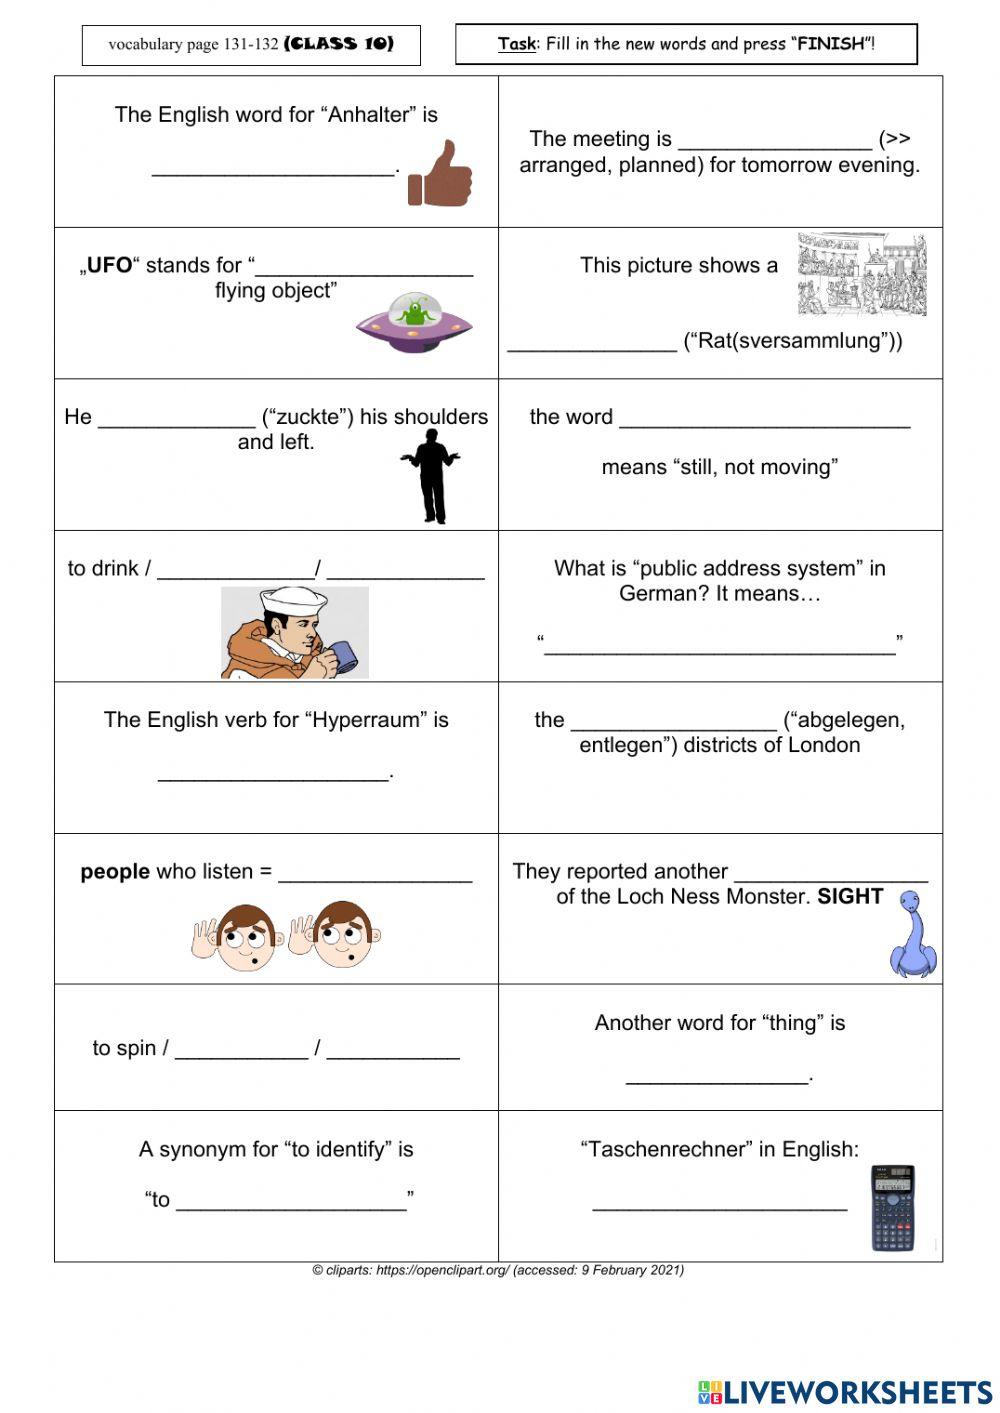 Class 10 - vocabulary revision (pages 131-132)